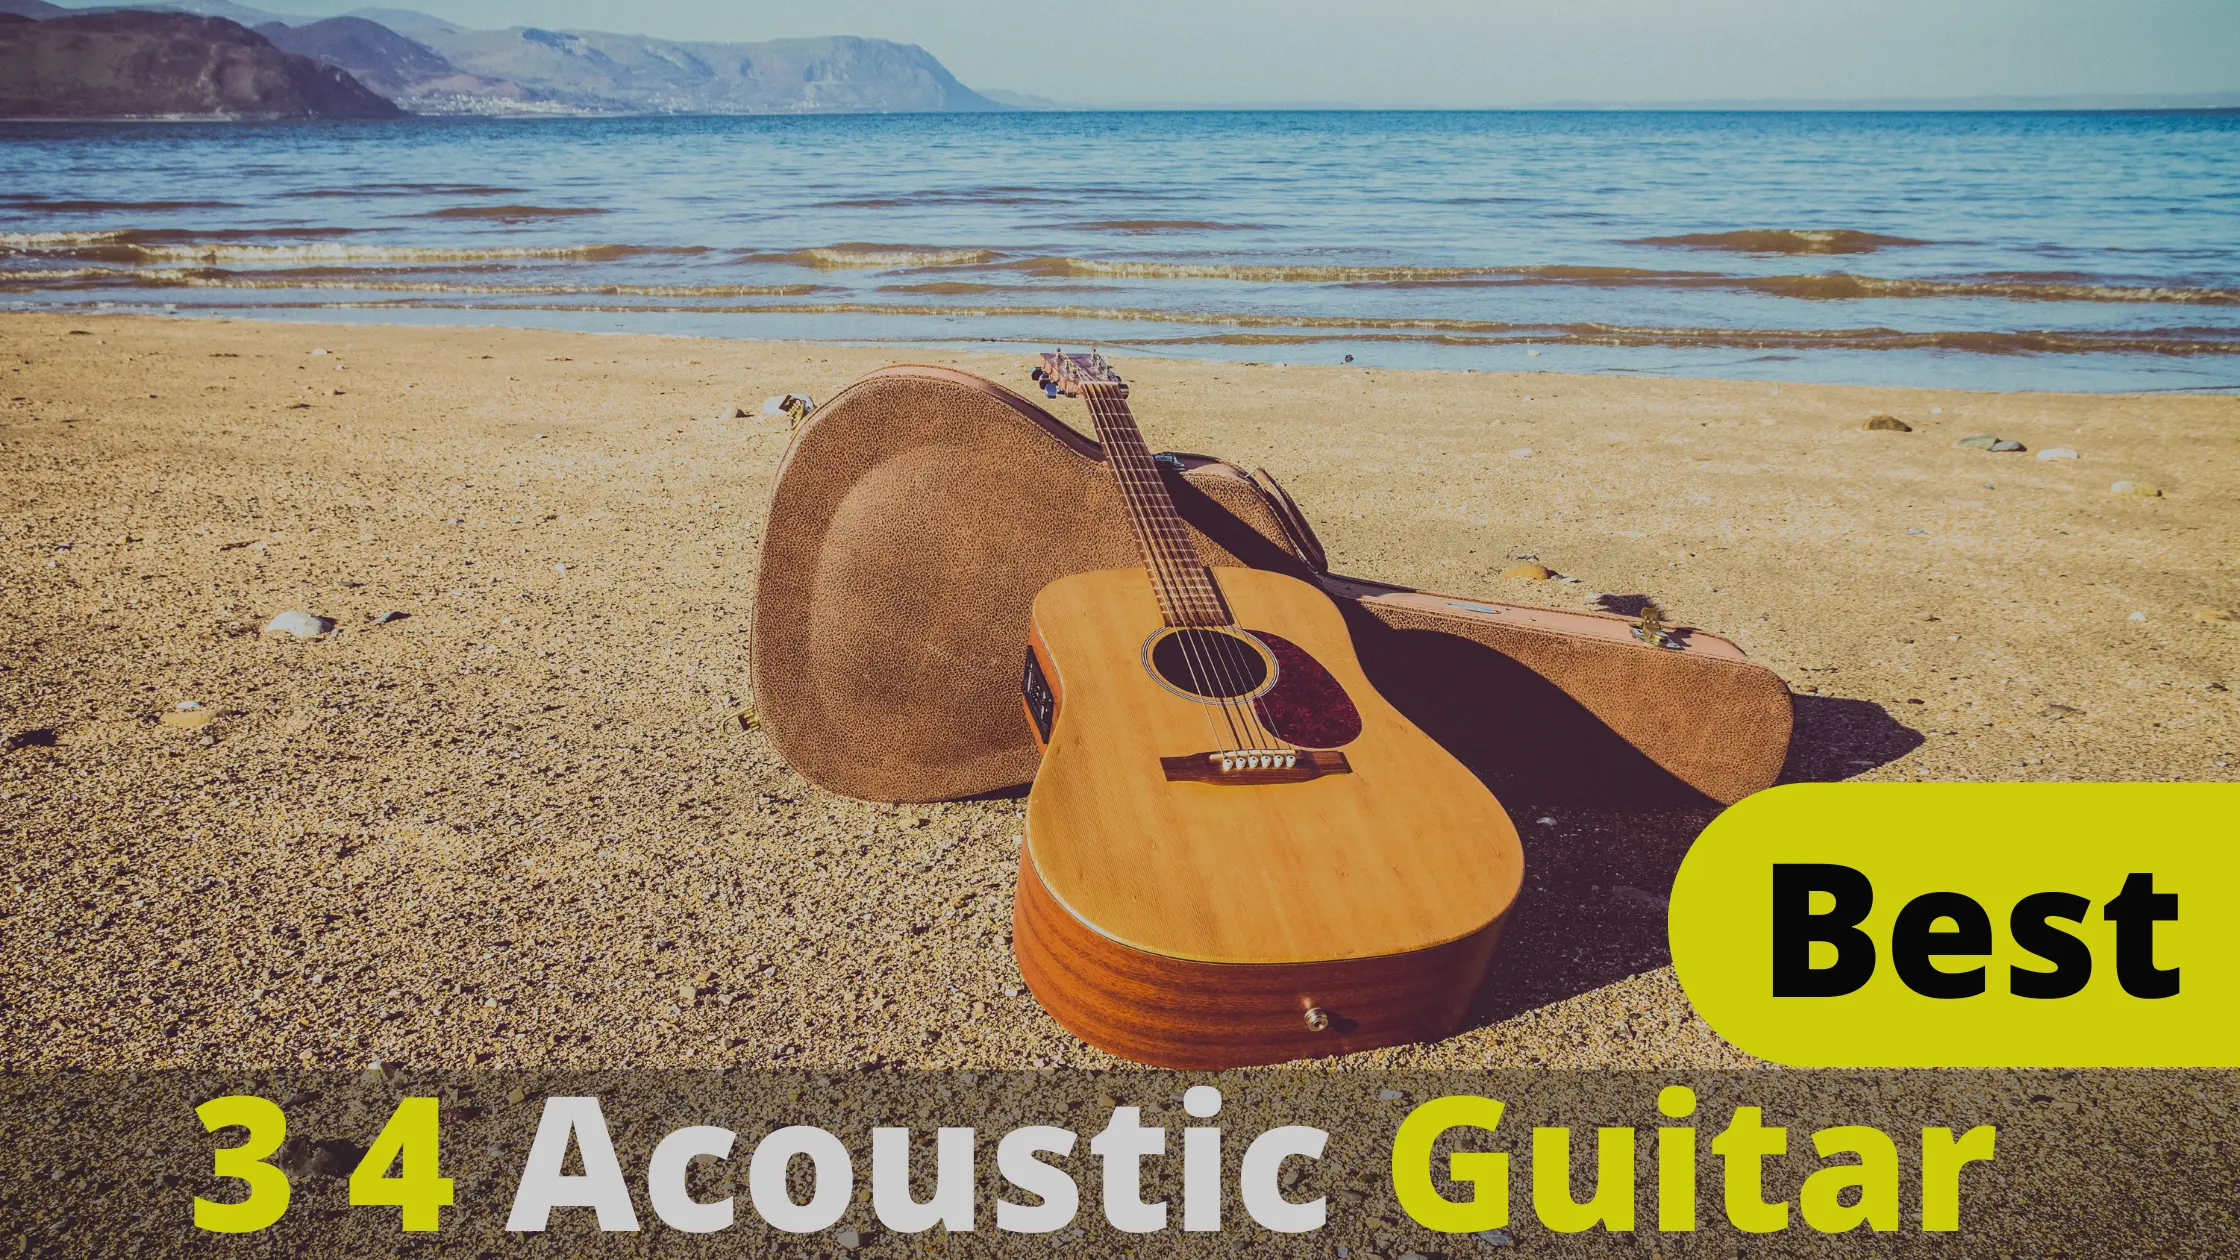 Top 10 Best 3 4 Acoustic Guitar Reviews and Buying Guide 2022